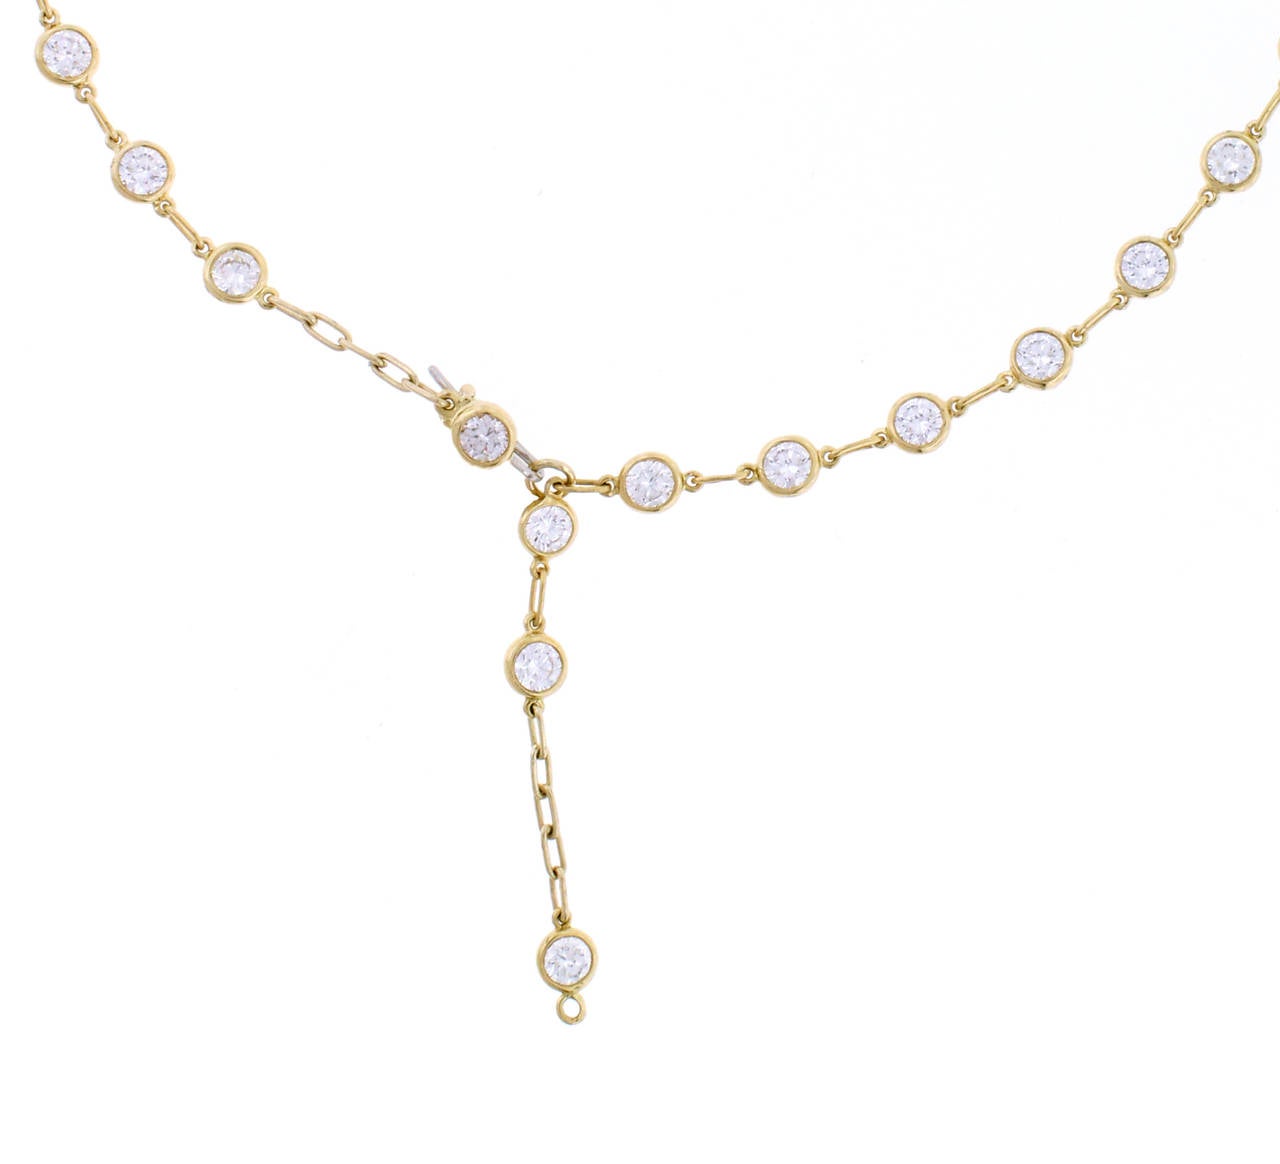 Tiffany round diamonds catch the light and make it dance. Diamond by the Yard Necklace in 18 karat gold with 44 diamonds weighing 6.60 carats. Original clasp design allows the necklace to be shortened to various lengths. Designed by Elsa Peretti